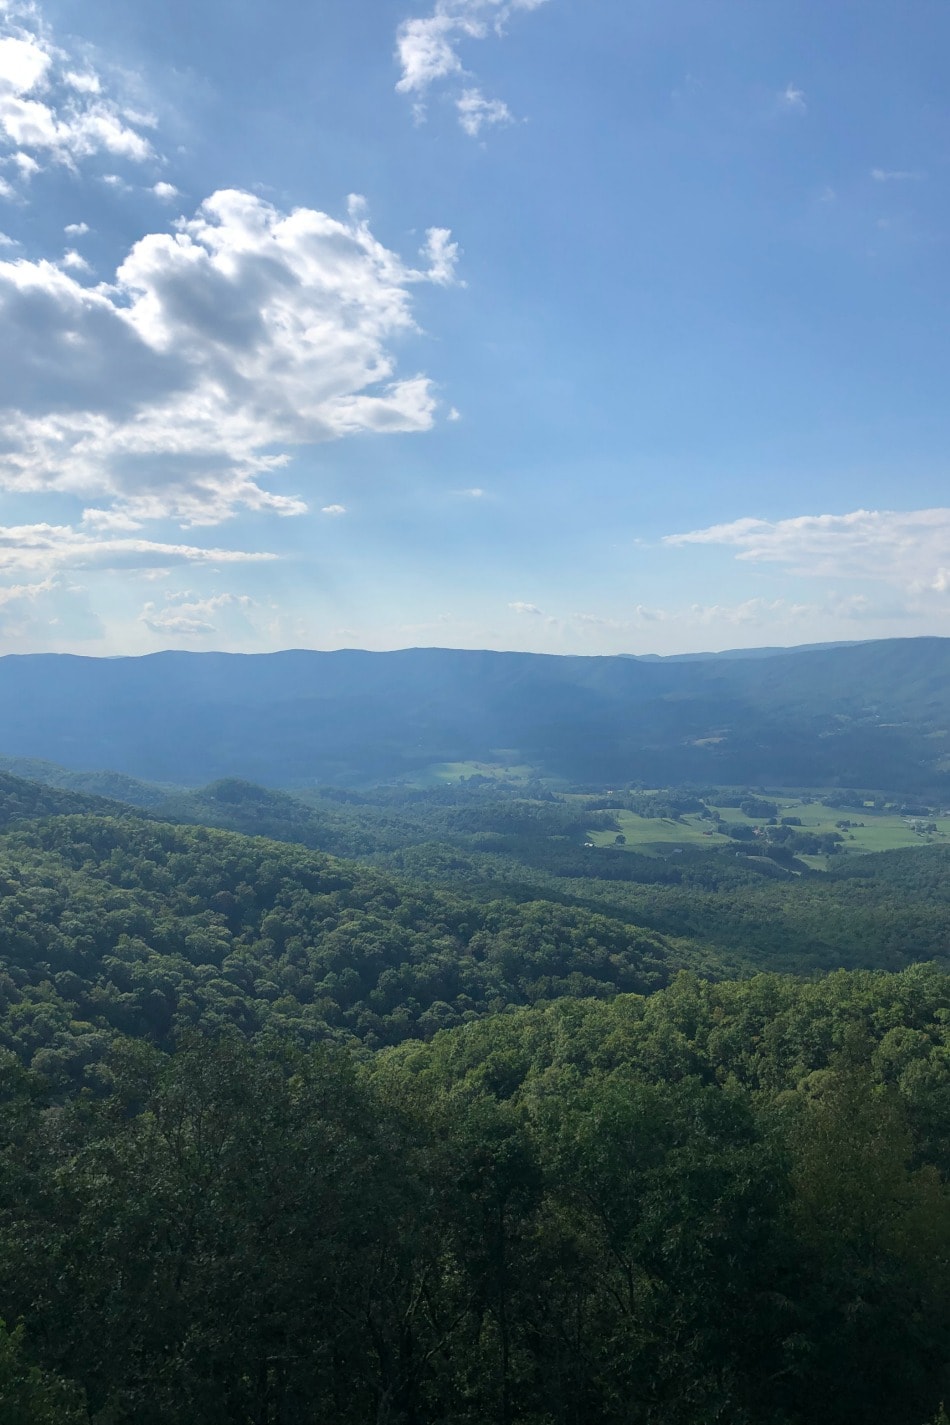 Labor Day Hike to the Fire Tower | Growing Up Herbal | Enjoy views of the Appalachian Mountains of East Tennessee in these photos from our Labor Day hike to the fire tower.